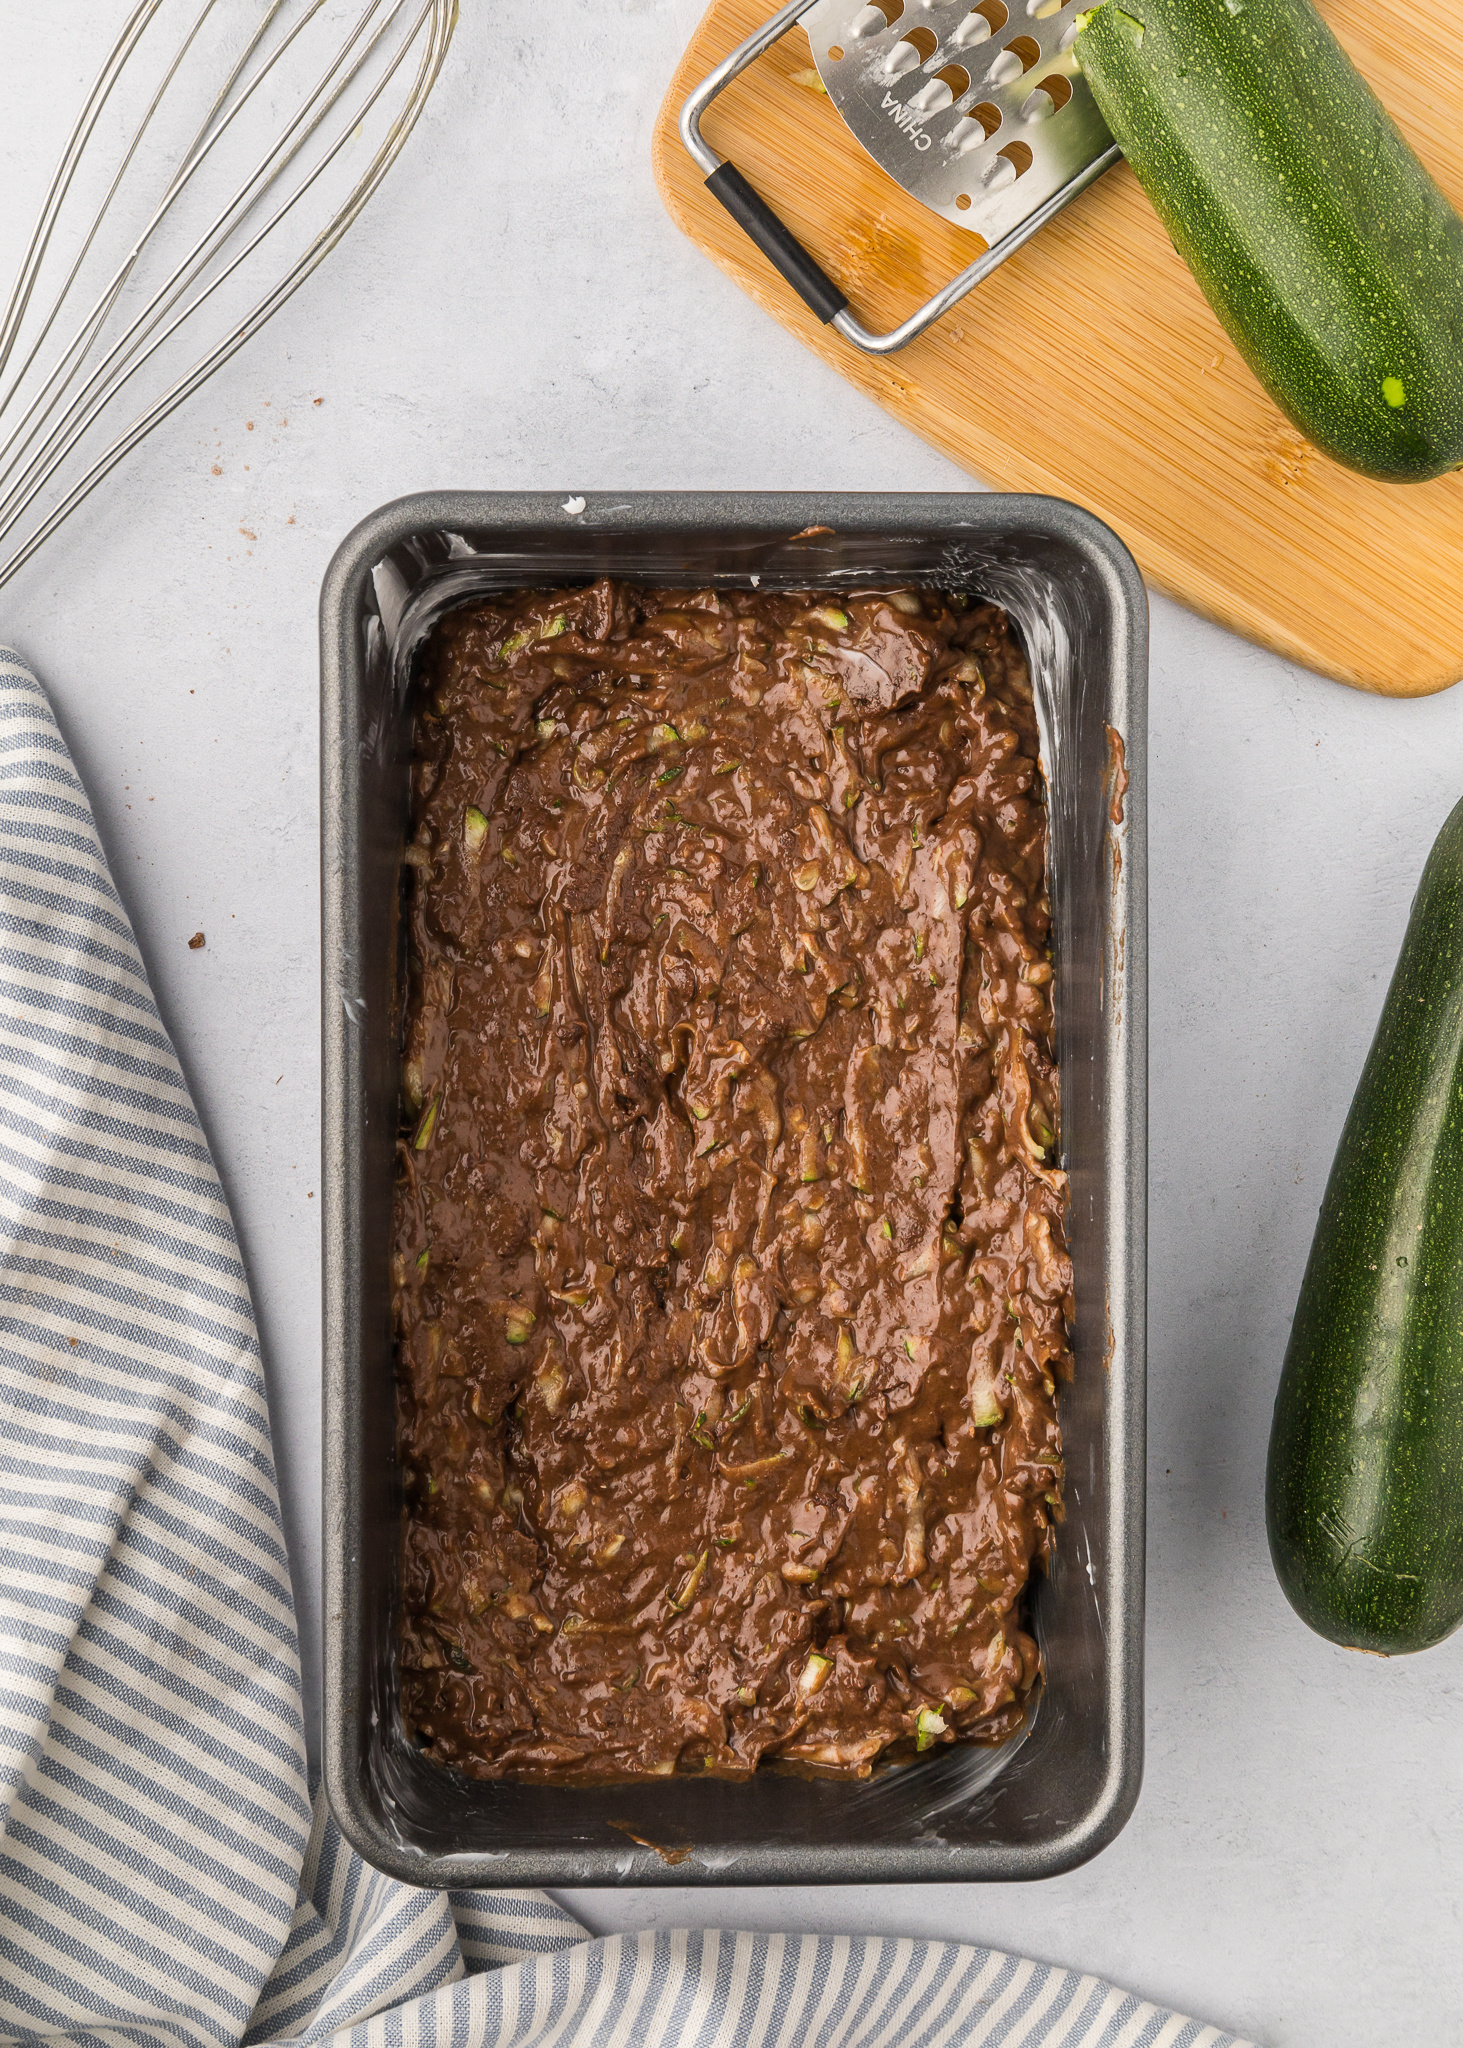 unbaked chocolate zucchini bread in loaf pan